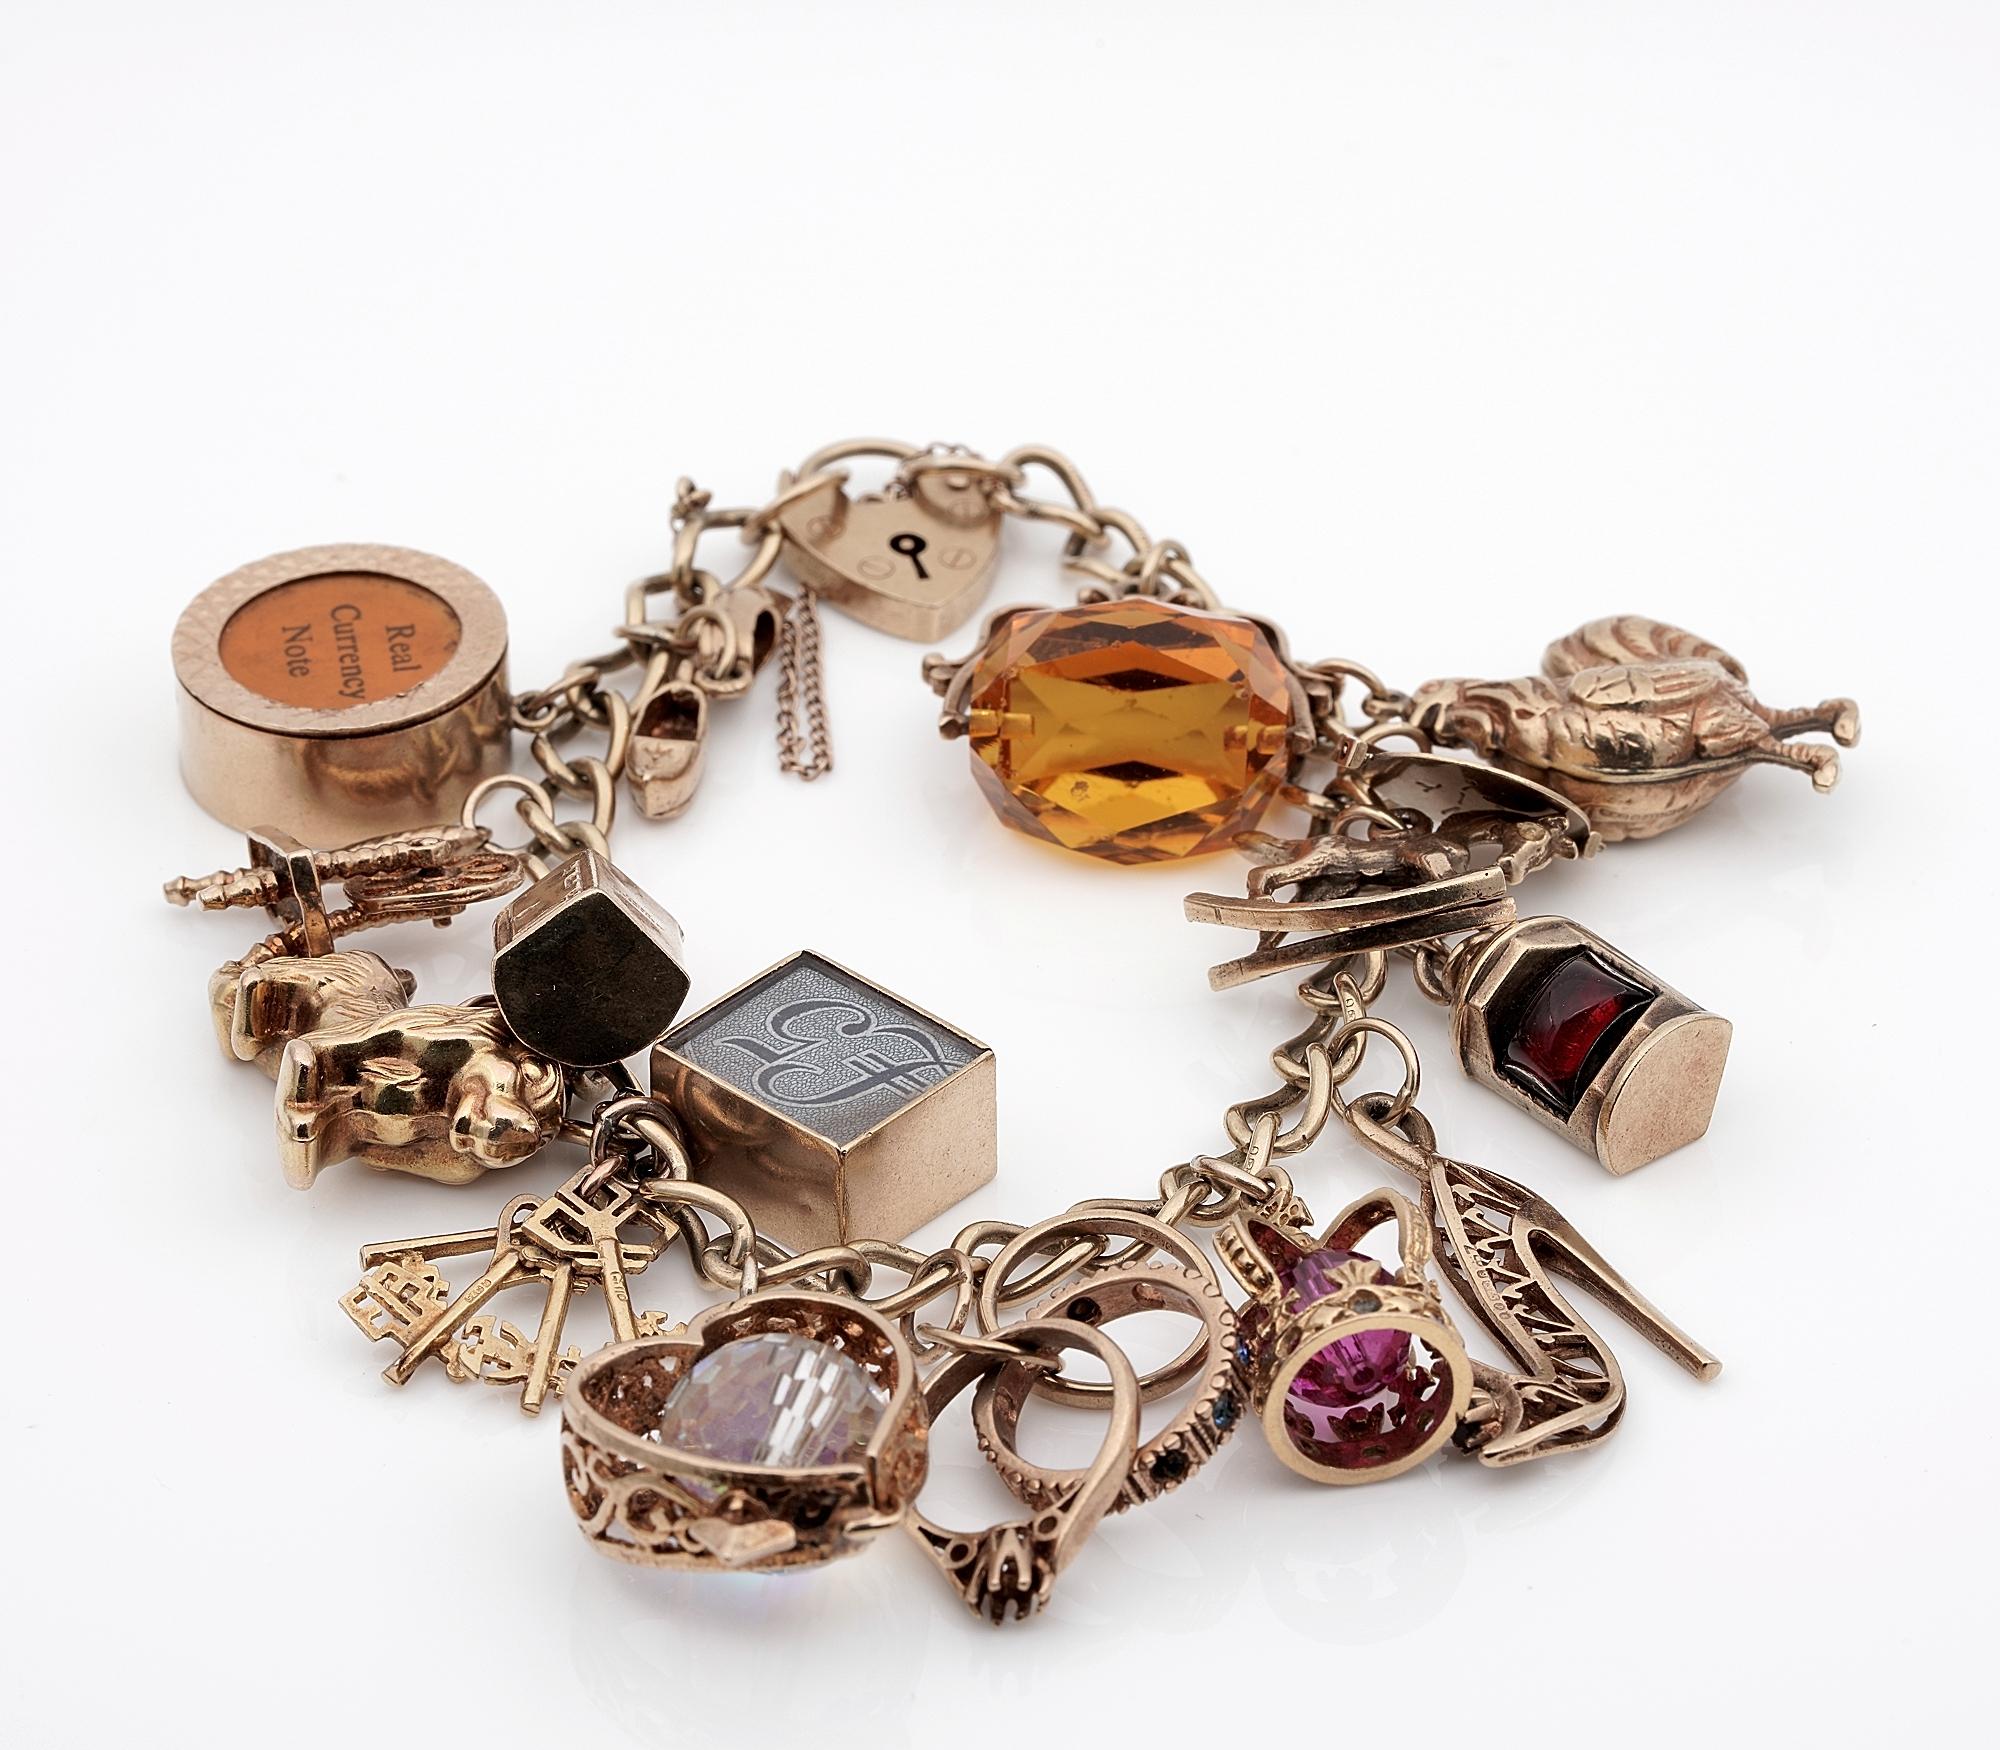 Collecting Fun from 20's to 40's

English origin vintage charm bracelet all crafted of solid 9 ct gold, hallmarked
Comprising a heart padlock bracelet loaded with 16 charms varying in age as added along the time
Charms include a dog, a cockerel, a